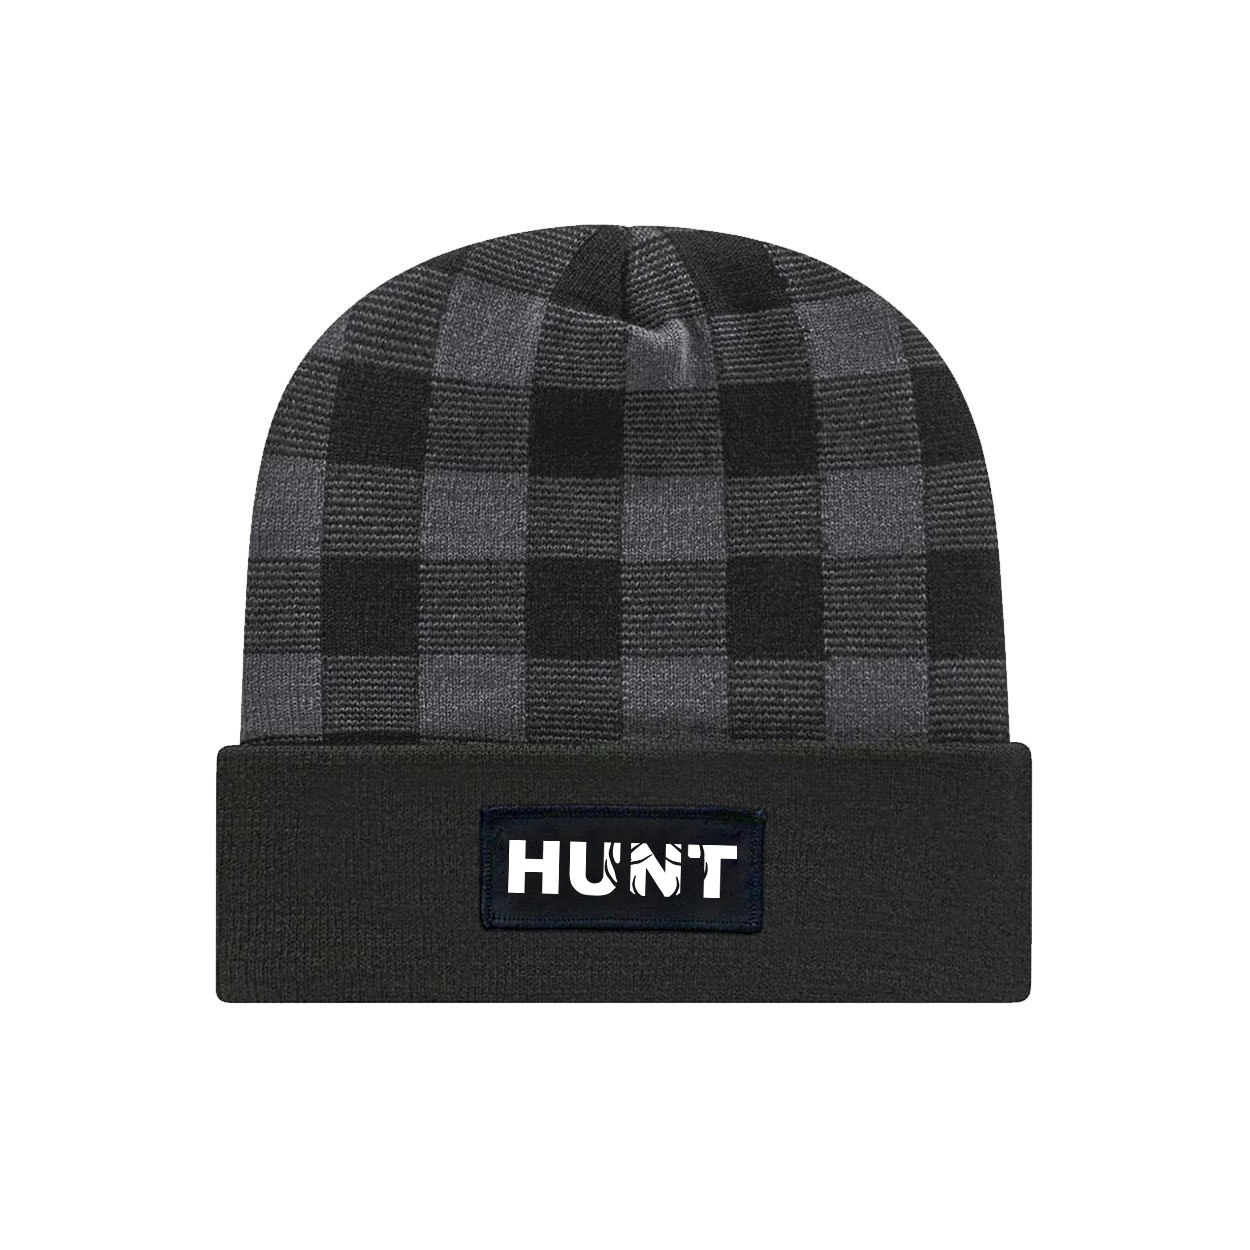 Hunt Rack Logo Night Out Woven Patch Roll Up Plaid Beanie Black/Heather Gray (White Logo)